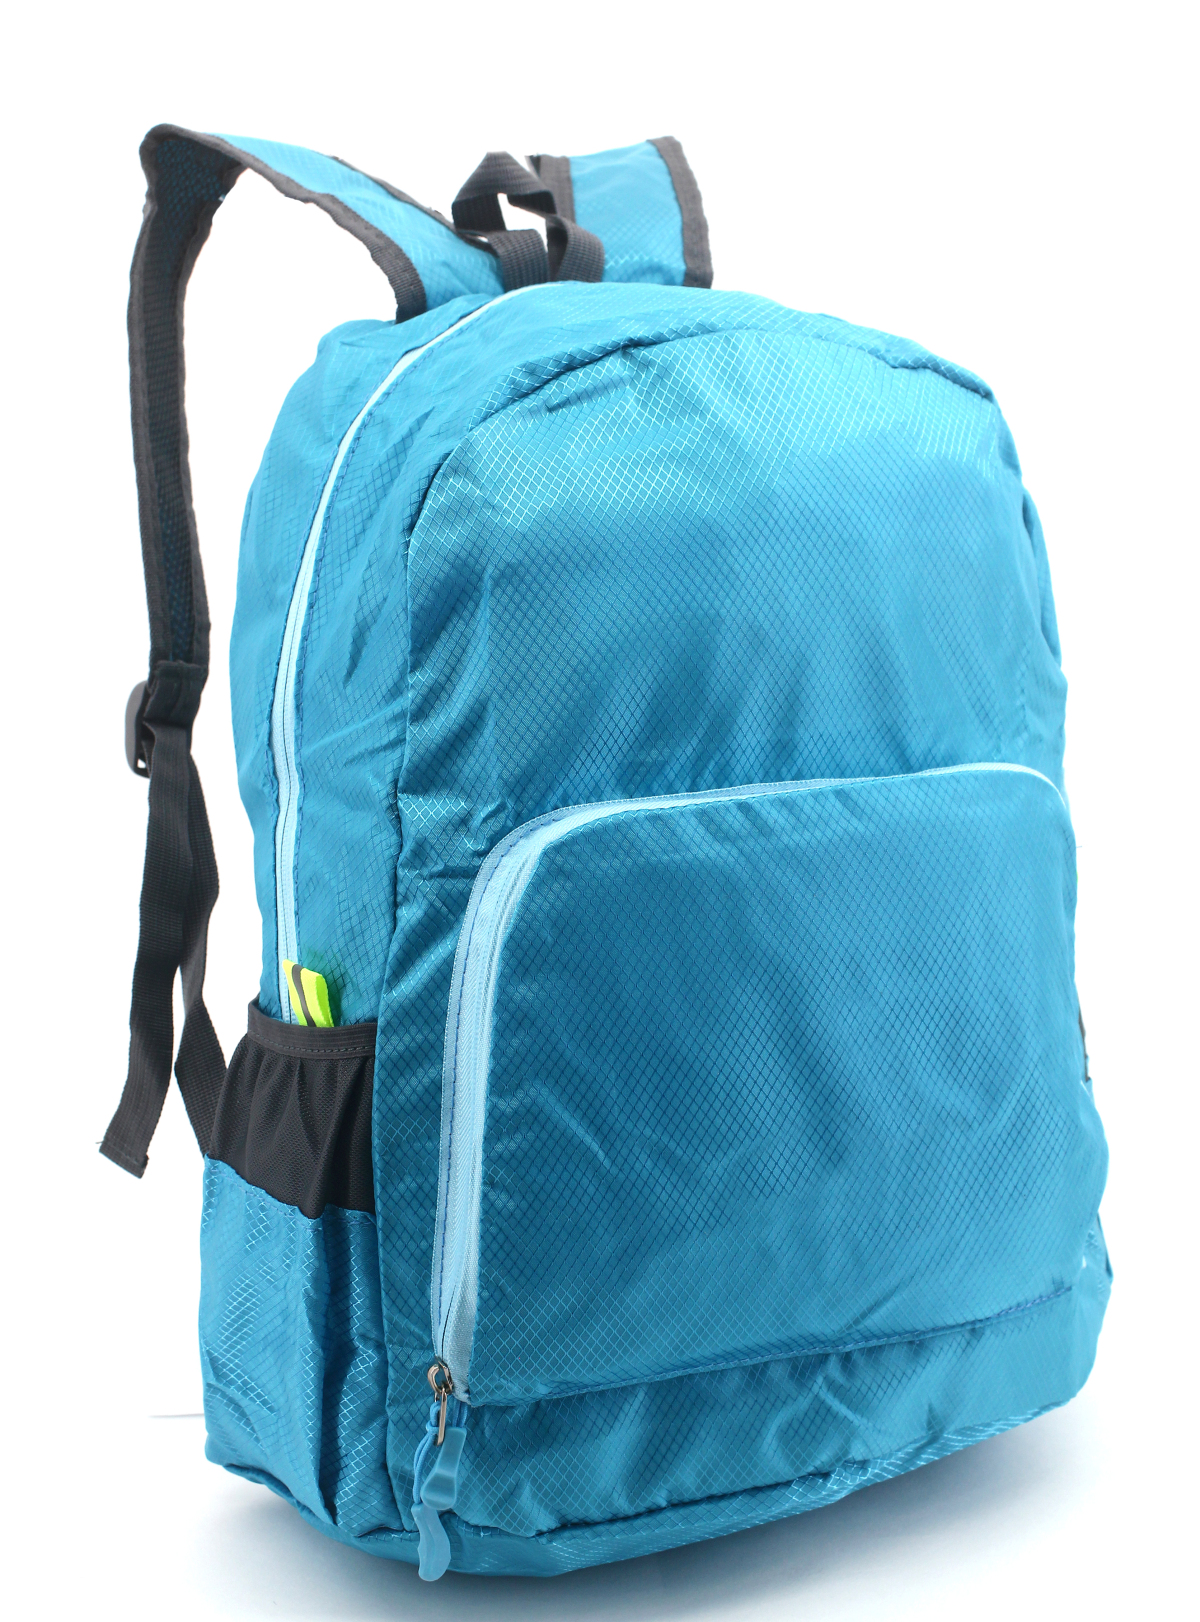 PACK N GO Foldable deluxe Daypack